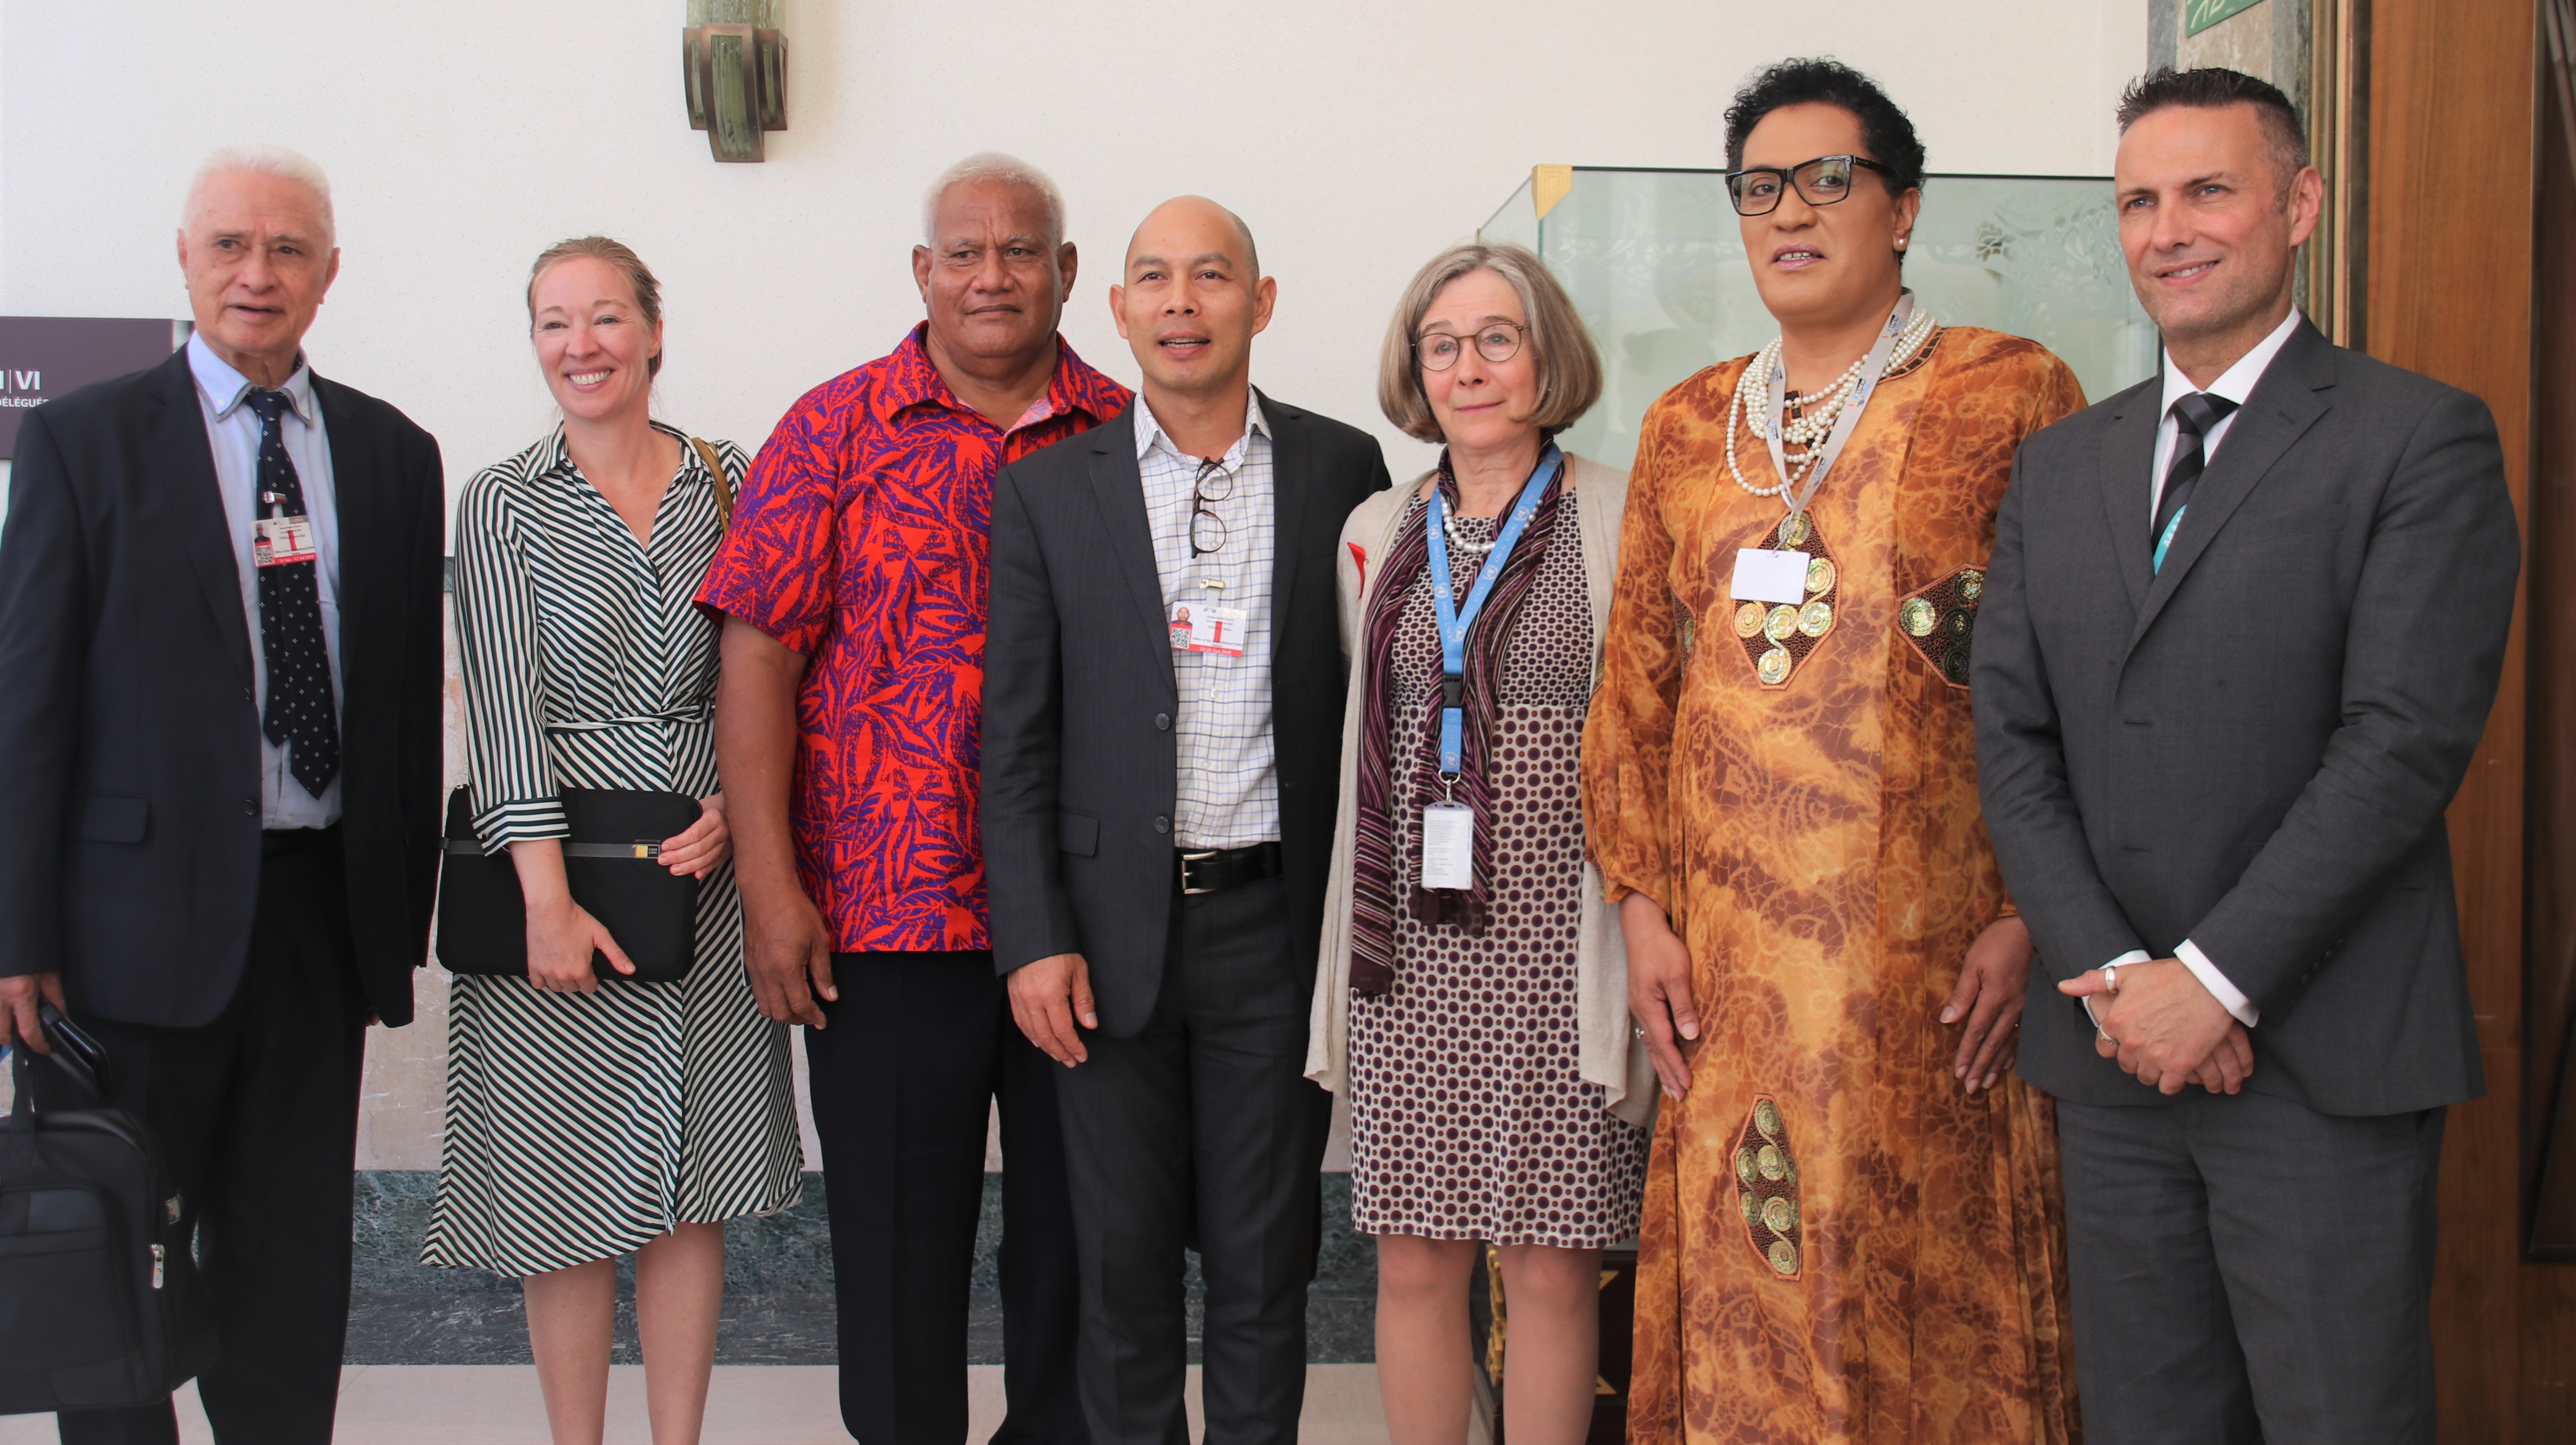 Miles Young, Director of RRRT with the panelists and partners at the Pacific side event hosted by RRRT in Geneva at the Human Rights Council.jpg